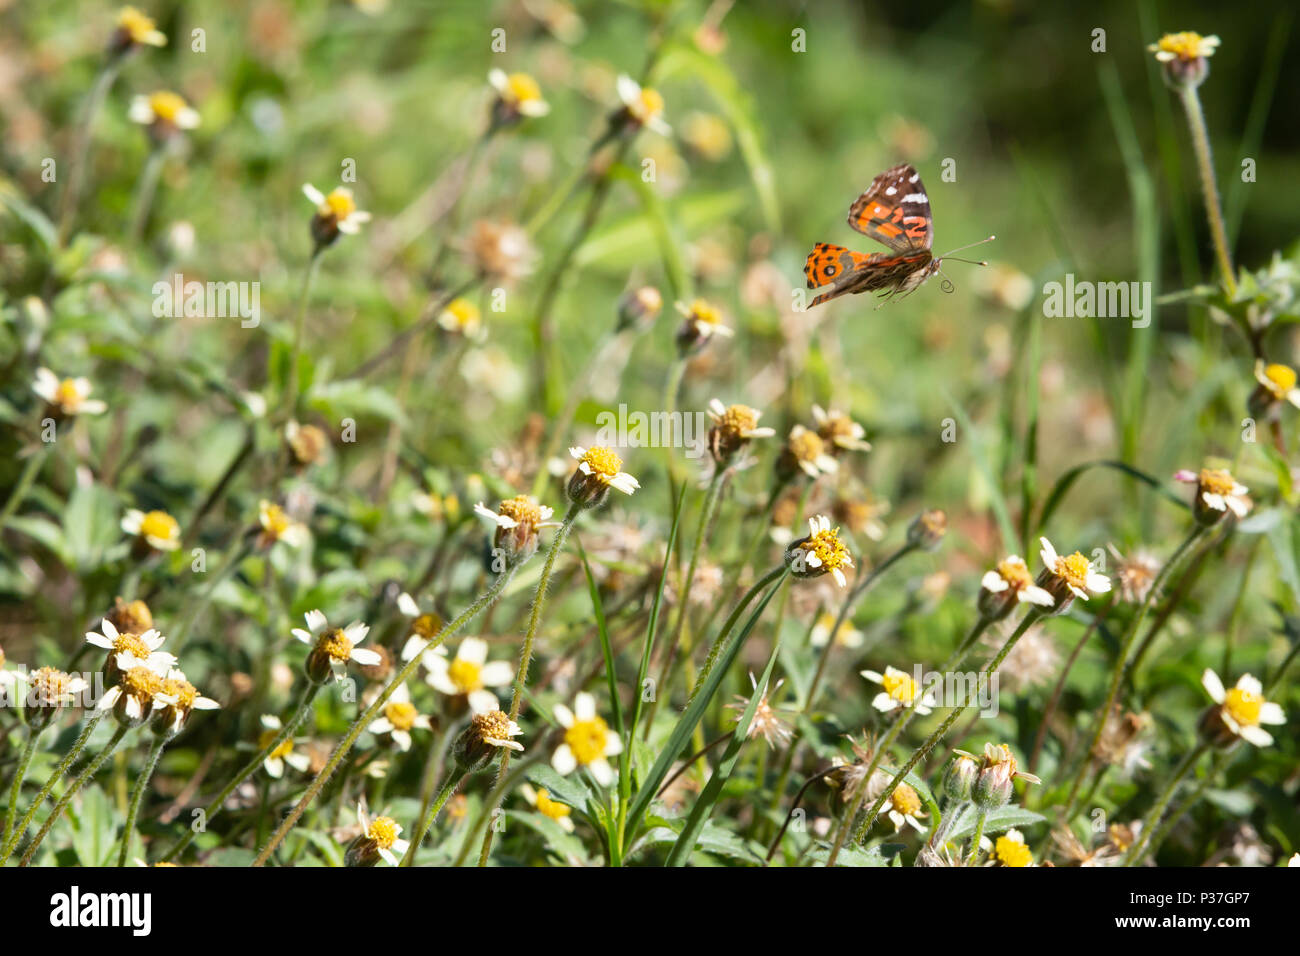 A Brazilian painted lady (Vanessa braziliensis) butterfly with broken wings flies over tridax daisy or coatbuttons (Tridax procumbens) blooming flower Stock Photo